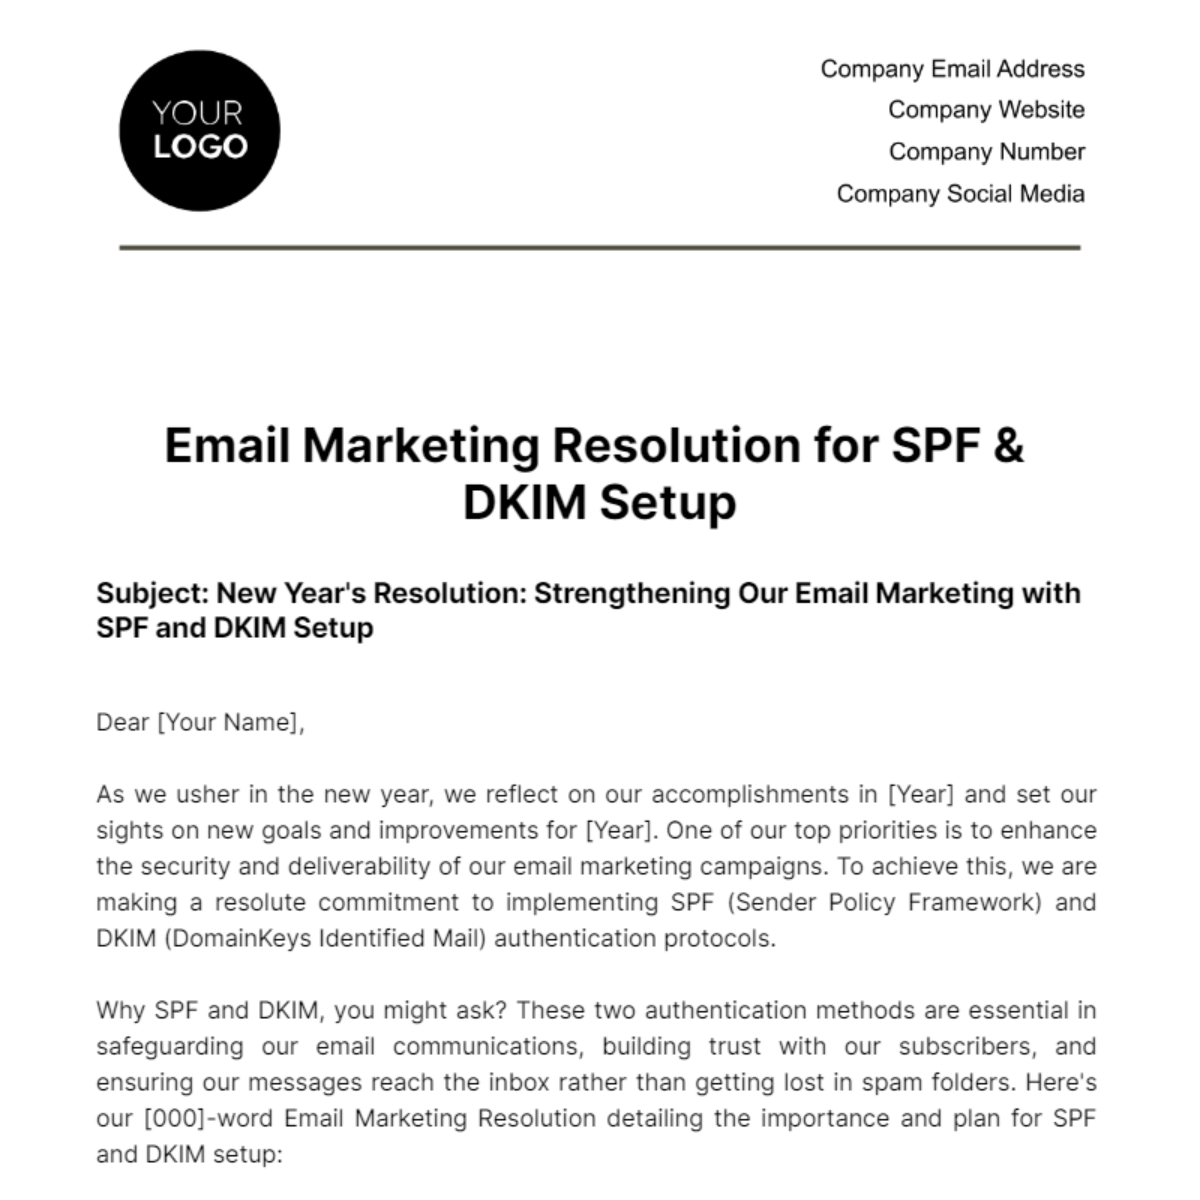 Free Email Marketing Resolution for SPF & DKIM Setup Template